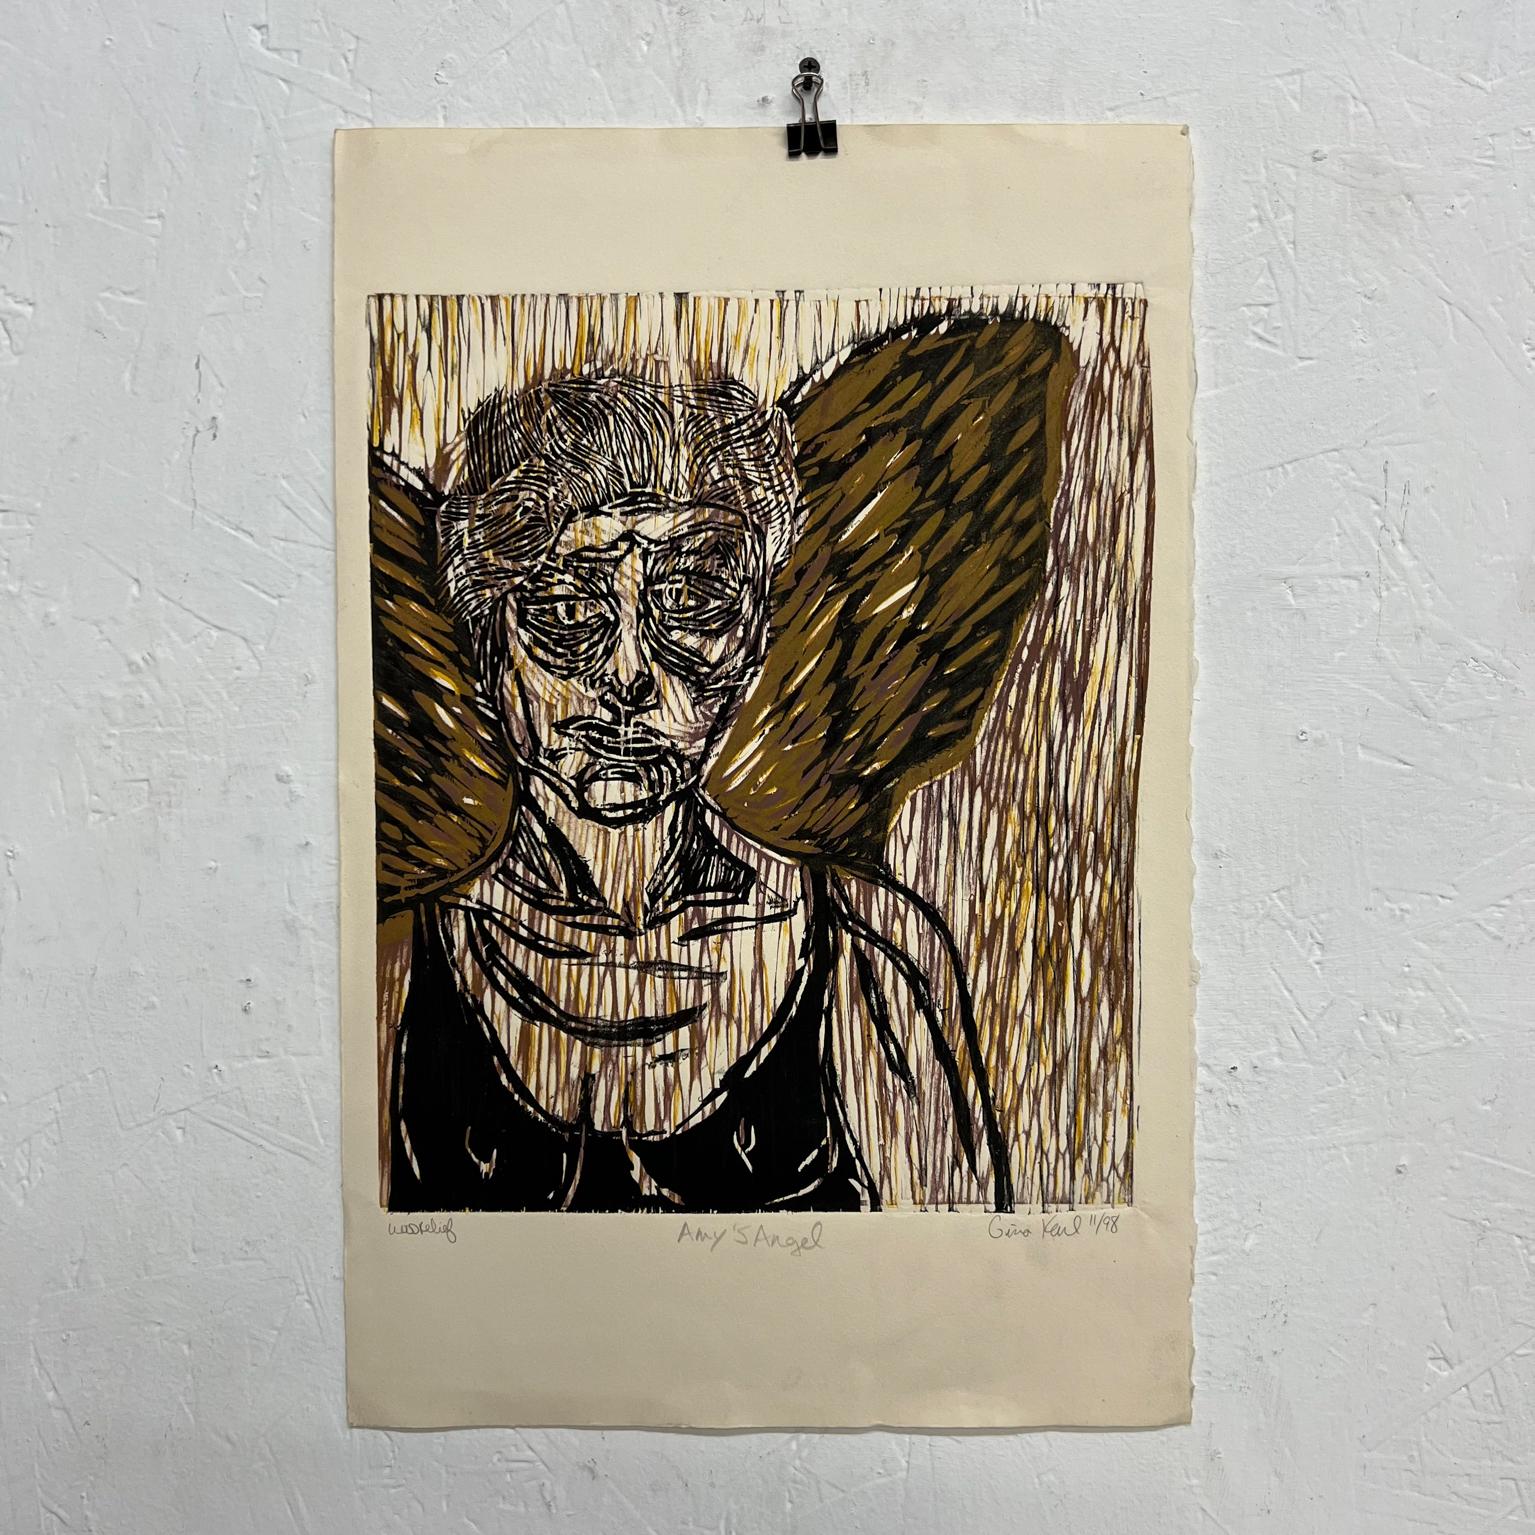 Artist Gina Kail Amy's Angel Wood Relief 11/98
Block printing on paper
paper 13.13 x 20 art 11.5 x 14
Preowned condition original vintage
See images provided.



